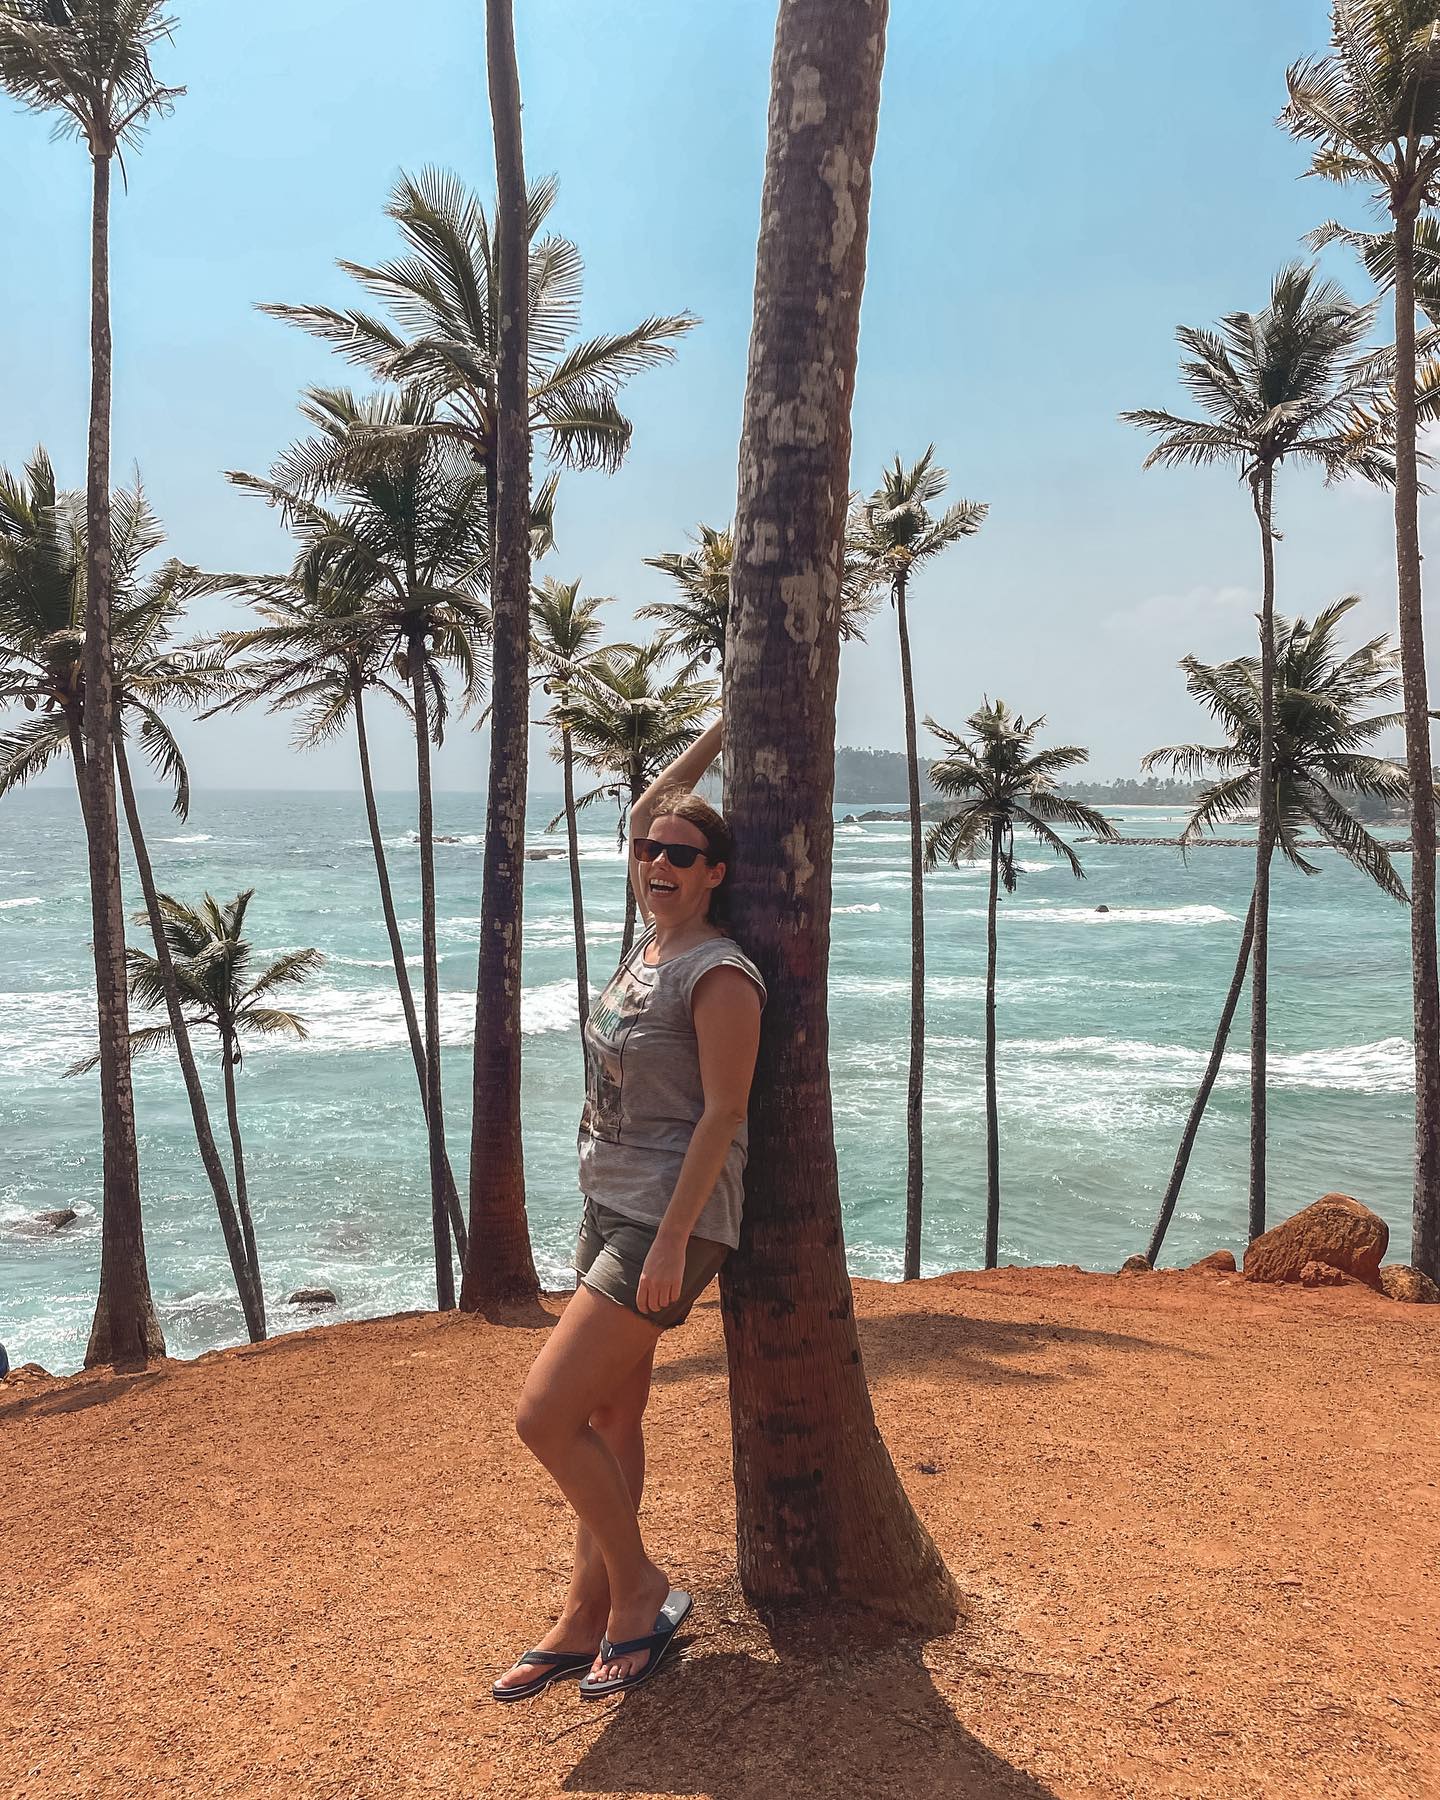 Today I went to Mirissa for a day and finally I have my own “Coconut Tree Hill” picture 😄 What do you think? Is it a good one in the collection of thousands of pictures on Instagram (this is an insta famous coconut tree hill) 😂

#coconuttreehill #mirissabeach #instapicoftheday #coconuttrees🌴 #srilankadaily #worldtrip #mirissasrilanka #srilanka_travel #visitsrilanka #wereldreis #travelislife #wandermore #wanderer #backpackinglife #srilankatravels #travelerlife #reizen #reiseliebe #viajaresvivir #passionpassport